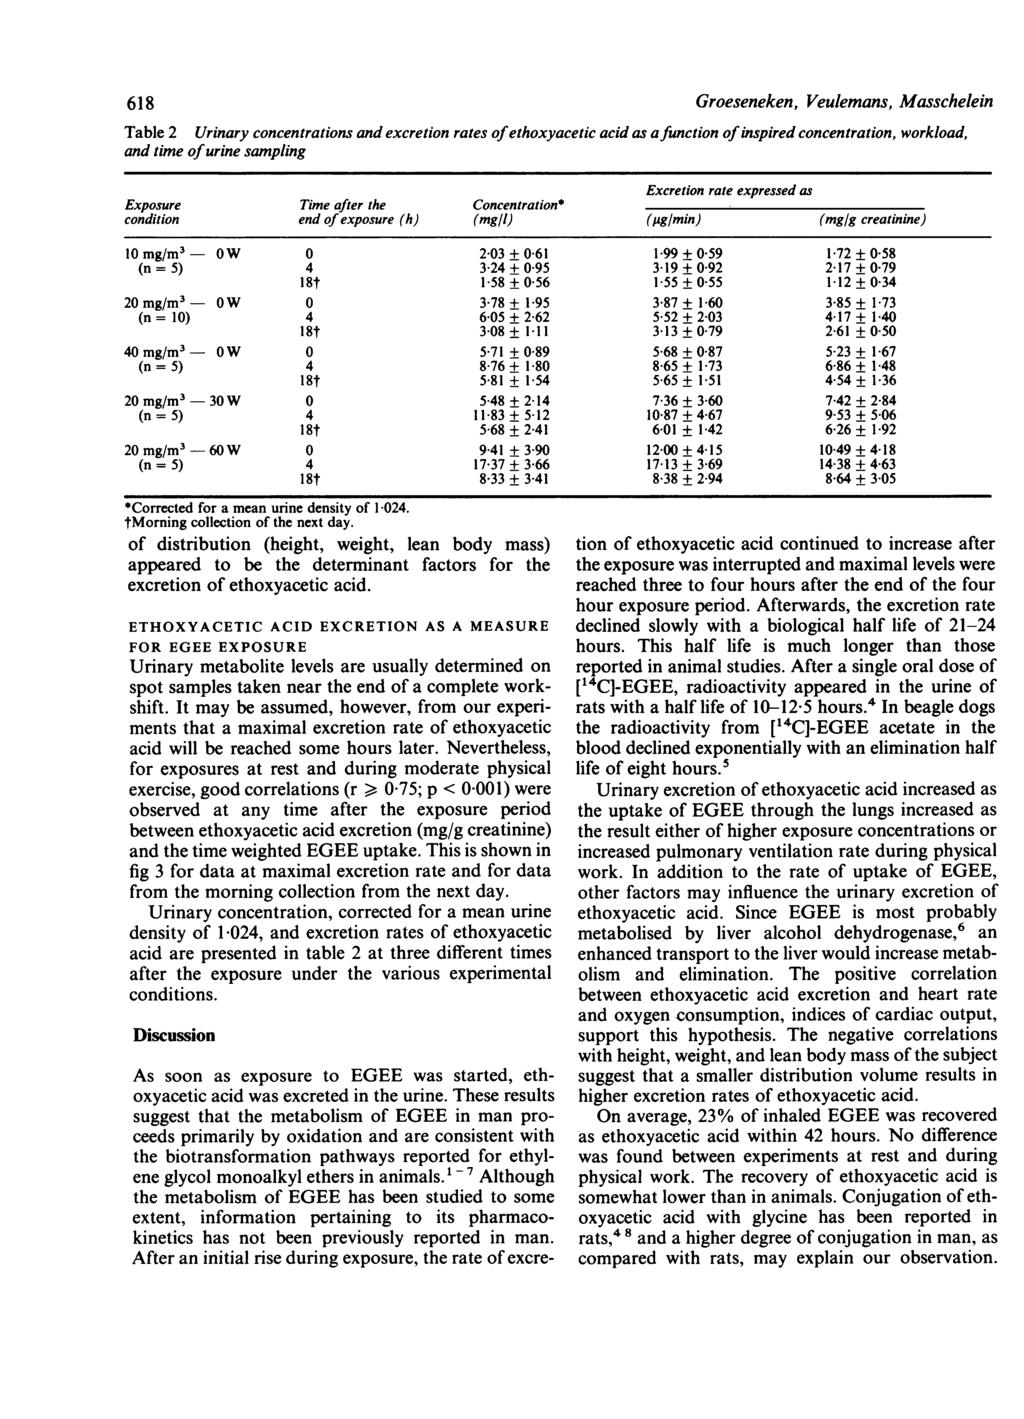 618 Table 2 Urinary concentrations and excretion rates ofethoxyacetic acid as afunction ofinspired concentration, workload, and time ofurine sampling xcretion rate expressed as xposure Time after the